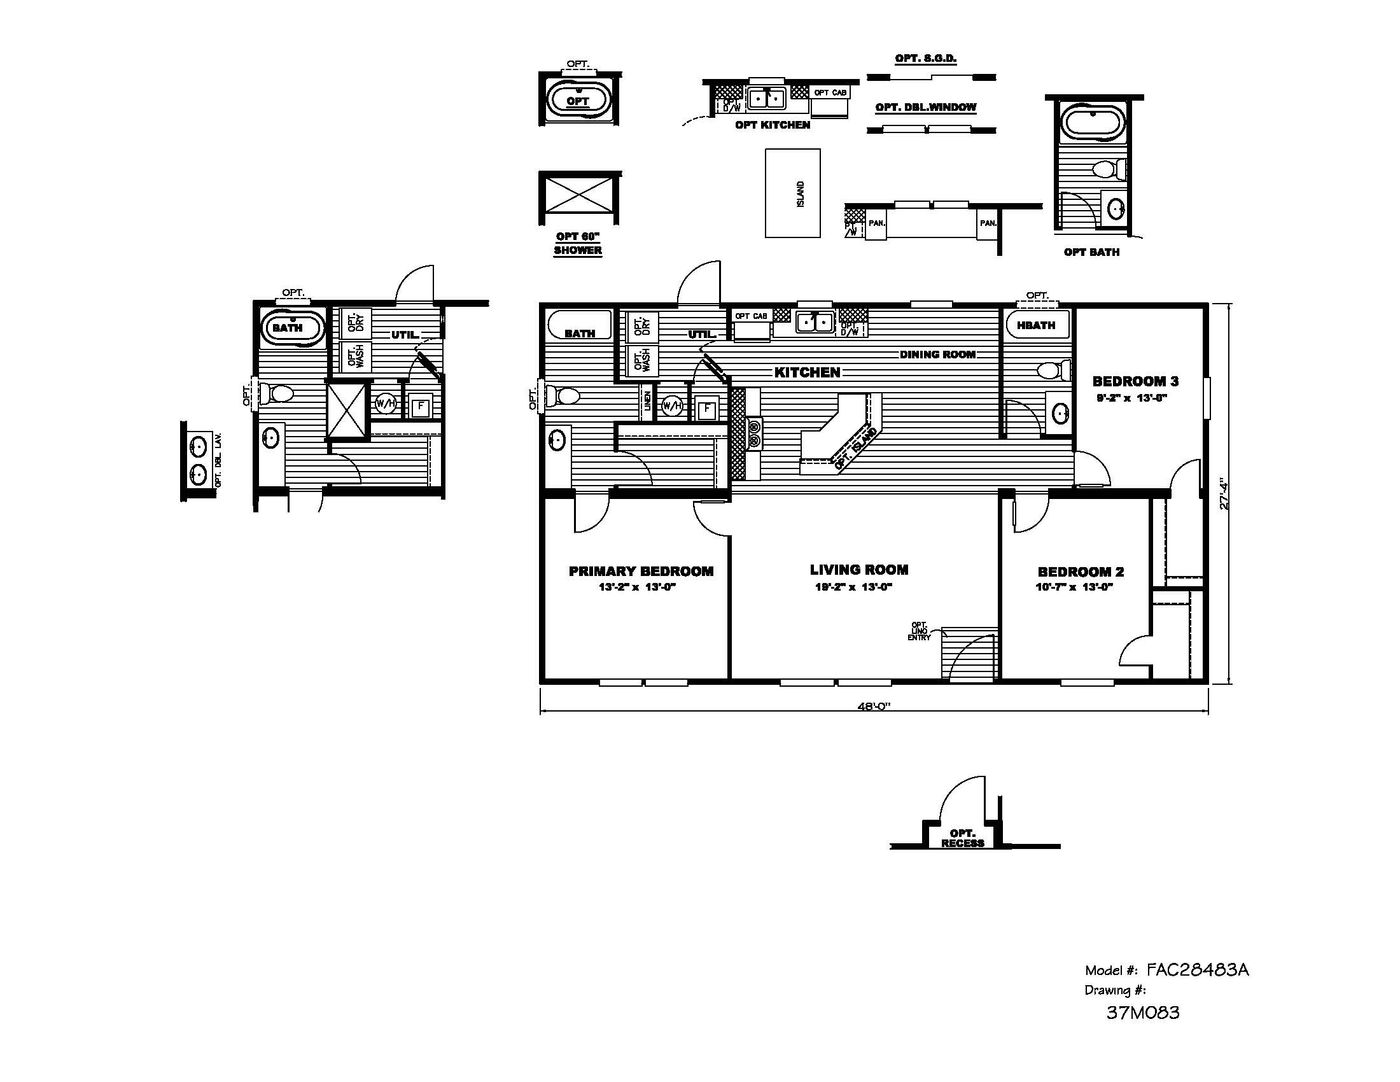 The THE BENJAMIN Floor Plan. This Manufactured Mobile Home features 3 bedrooms and 2 baths.